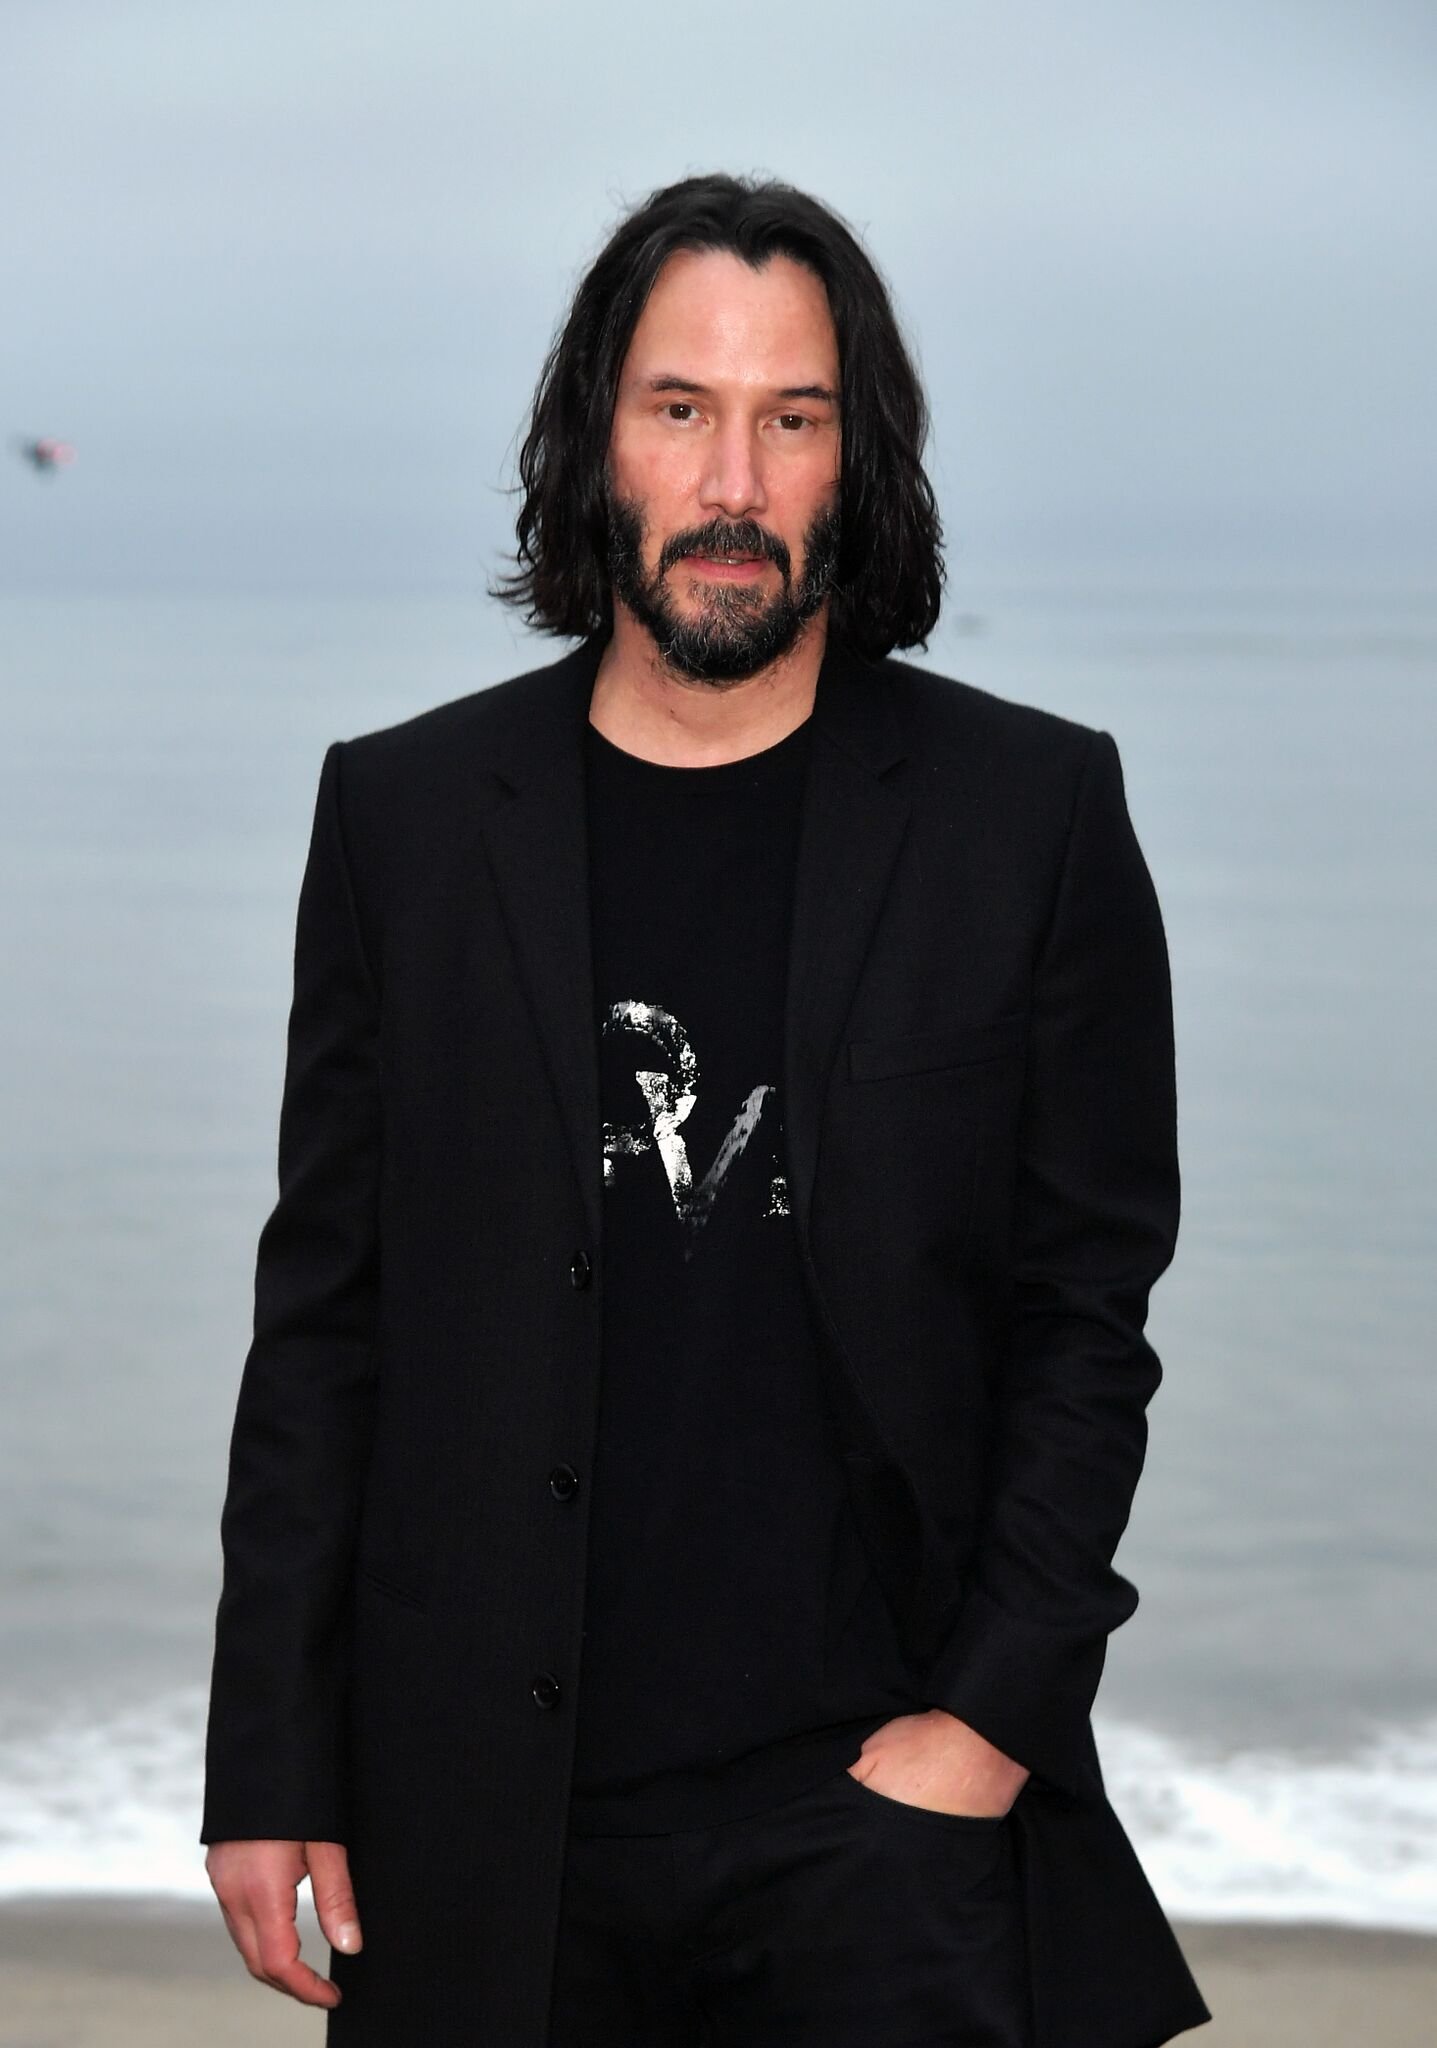 Keanu Reeves at the Saint Laurent Mens Spring Summer 20 Show on June 06, 2019 in Paradise Cove Malibu, California | Photo: Getty Images